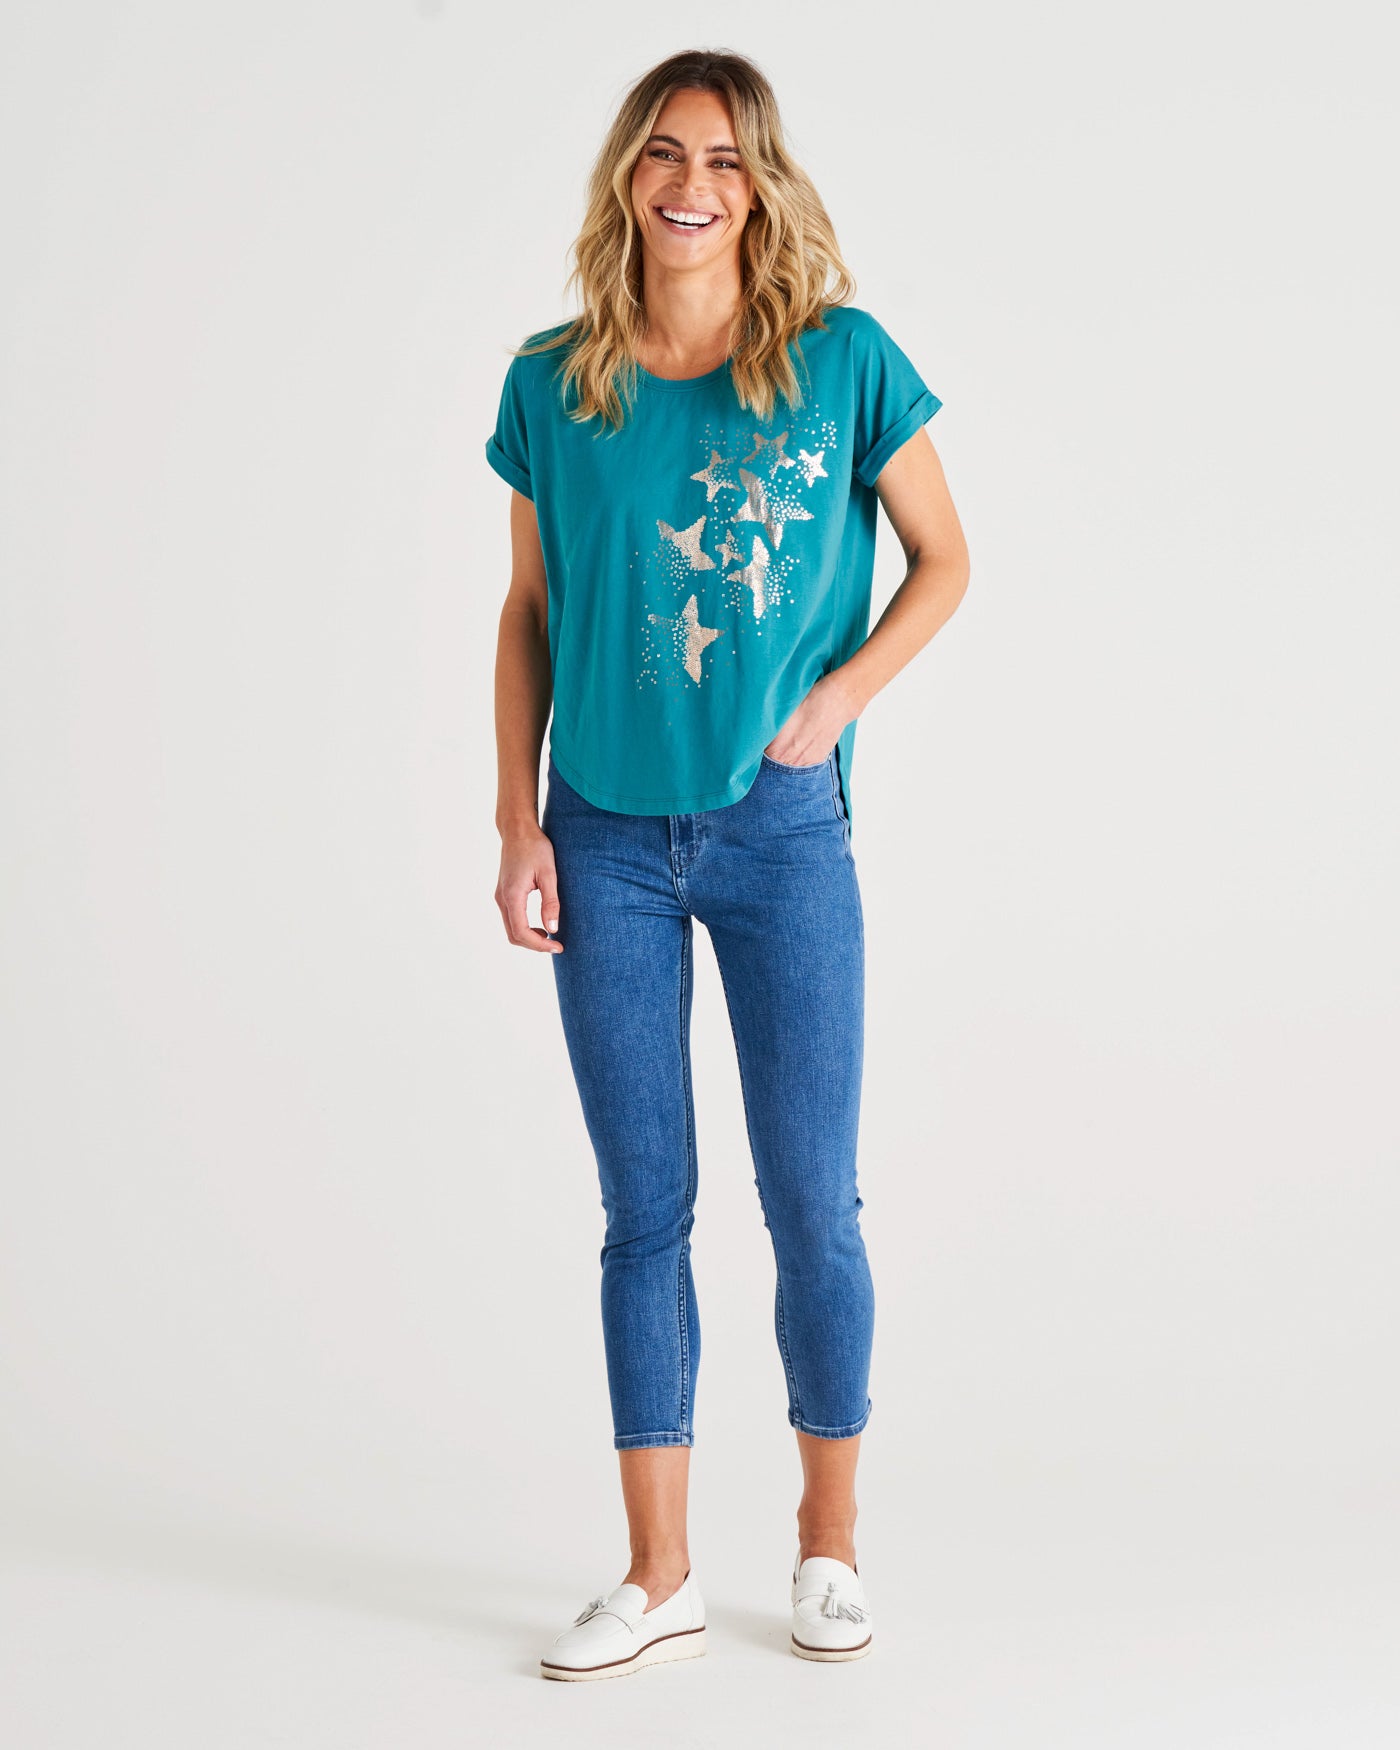 Bondi Relaxed Fit Cotton Printed Tee - Forest Print Turquoise